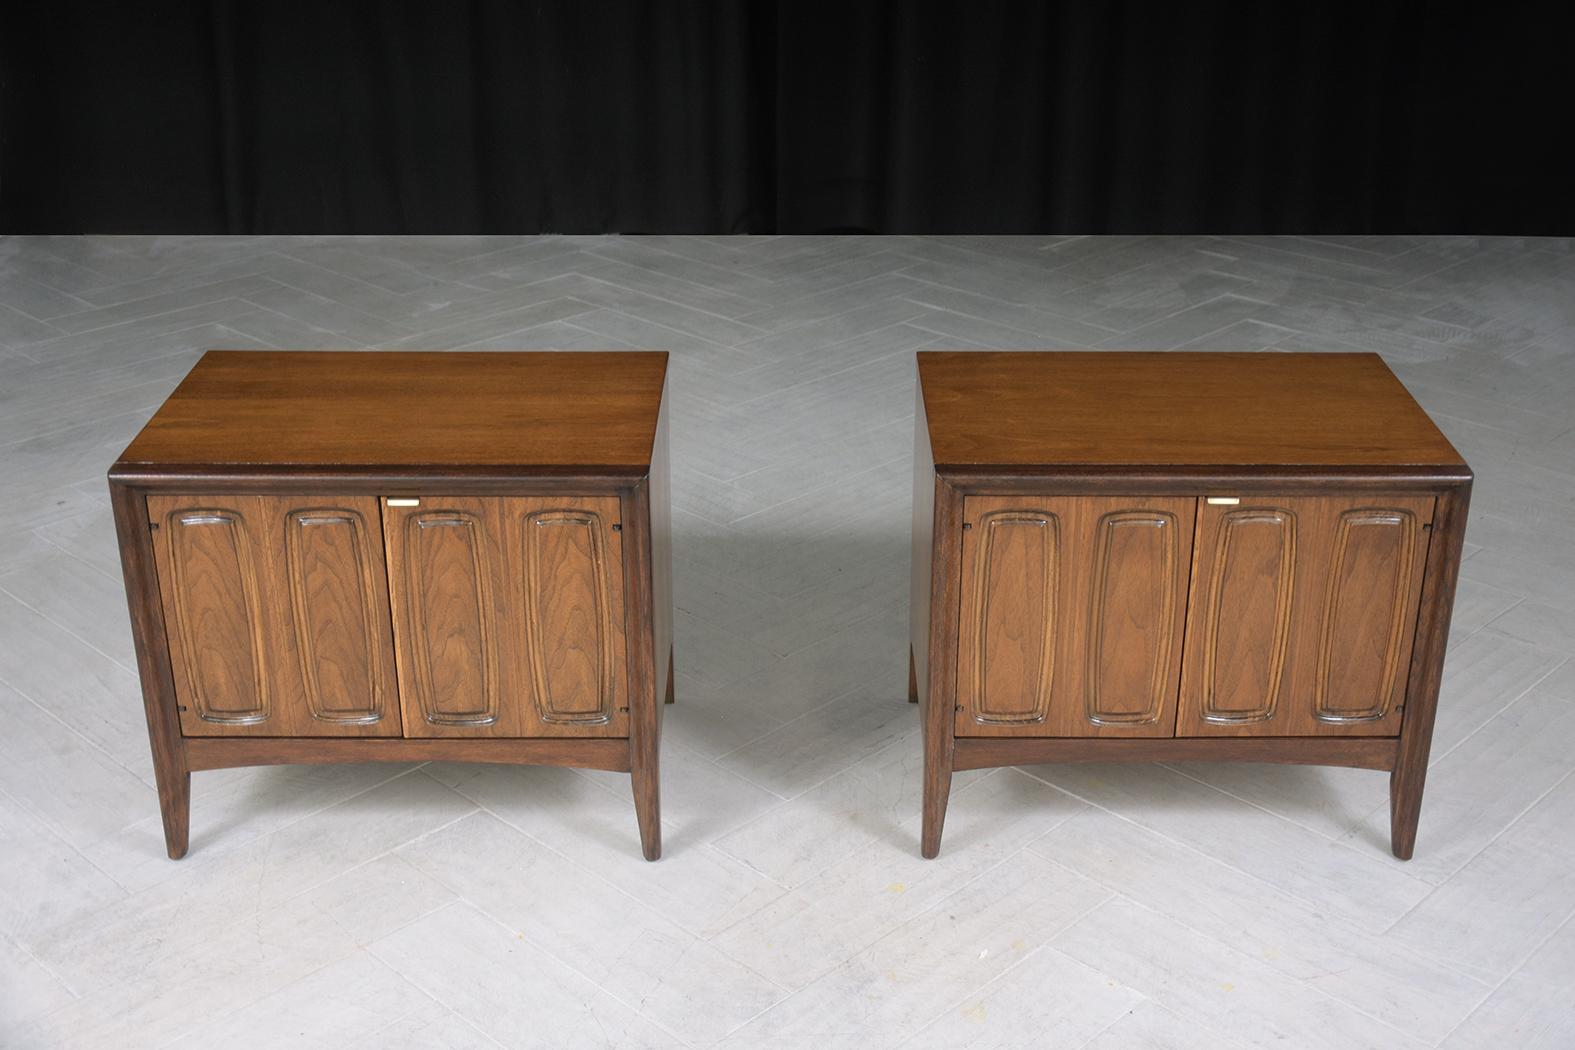 Introducing our meticulously restored Pair of Vintage 1960s Nightstands, skillfully hand-crafted from premium walnut wood. In exceptional condition, these mid-century modern nightstands capture attention with their harmonious blend of dark walnut